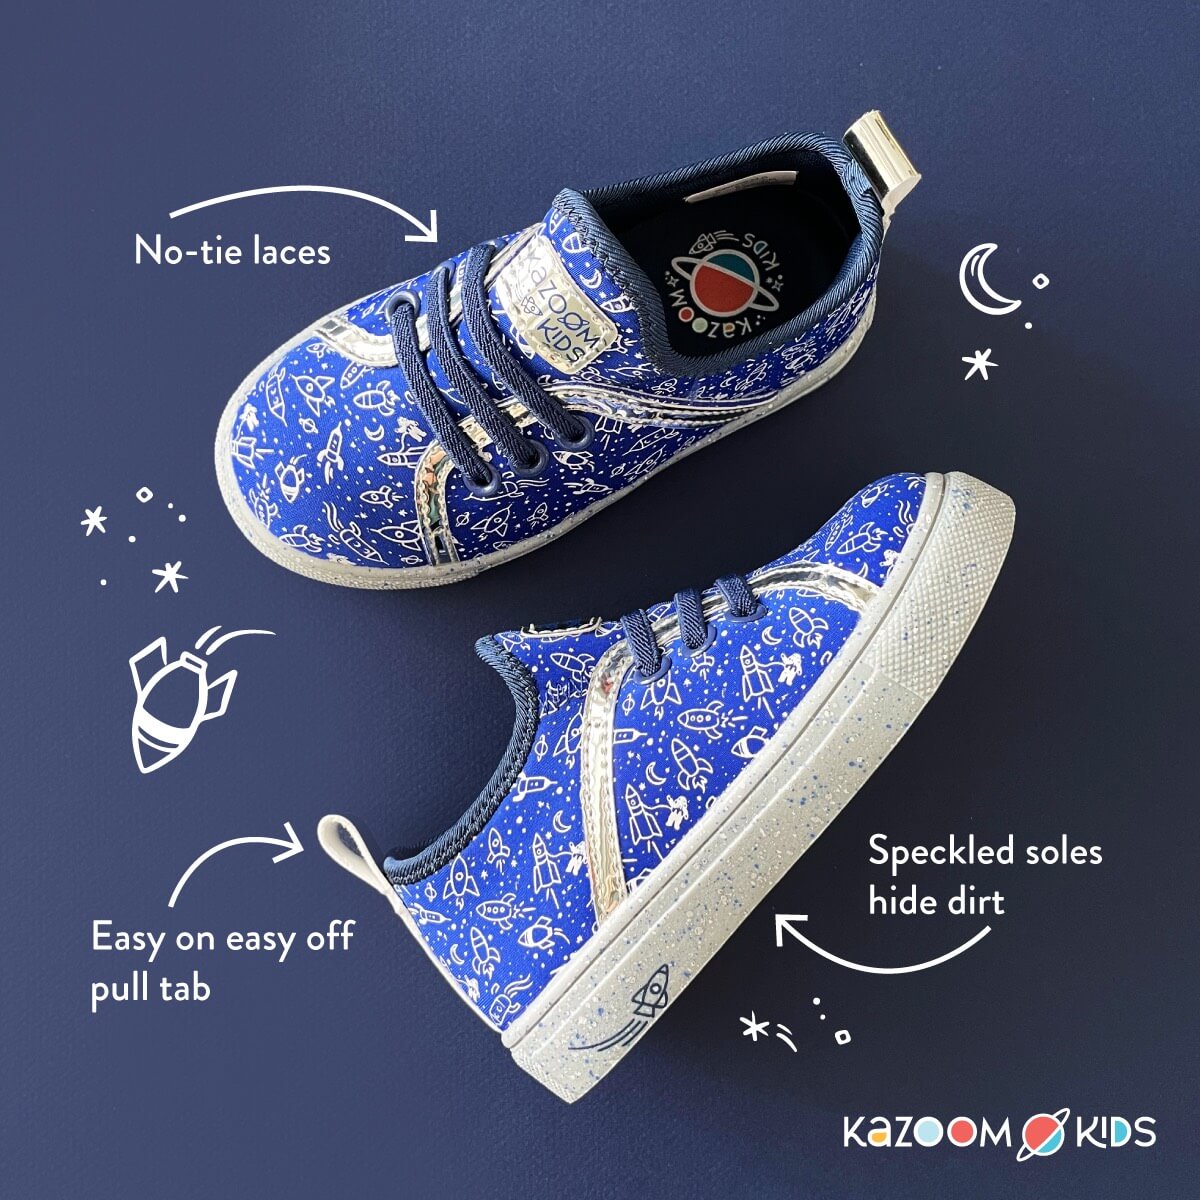 Kids slip on shoes - Blue Rocket boys Toddler Sneakers with call outs for no-tie laces, Easy on, and Speckled Soles